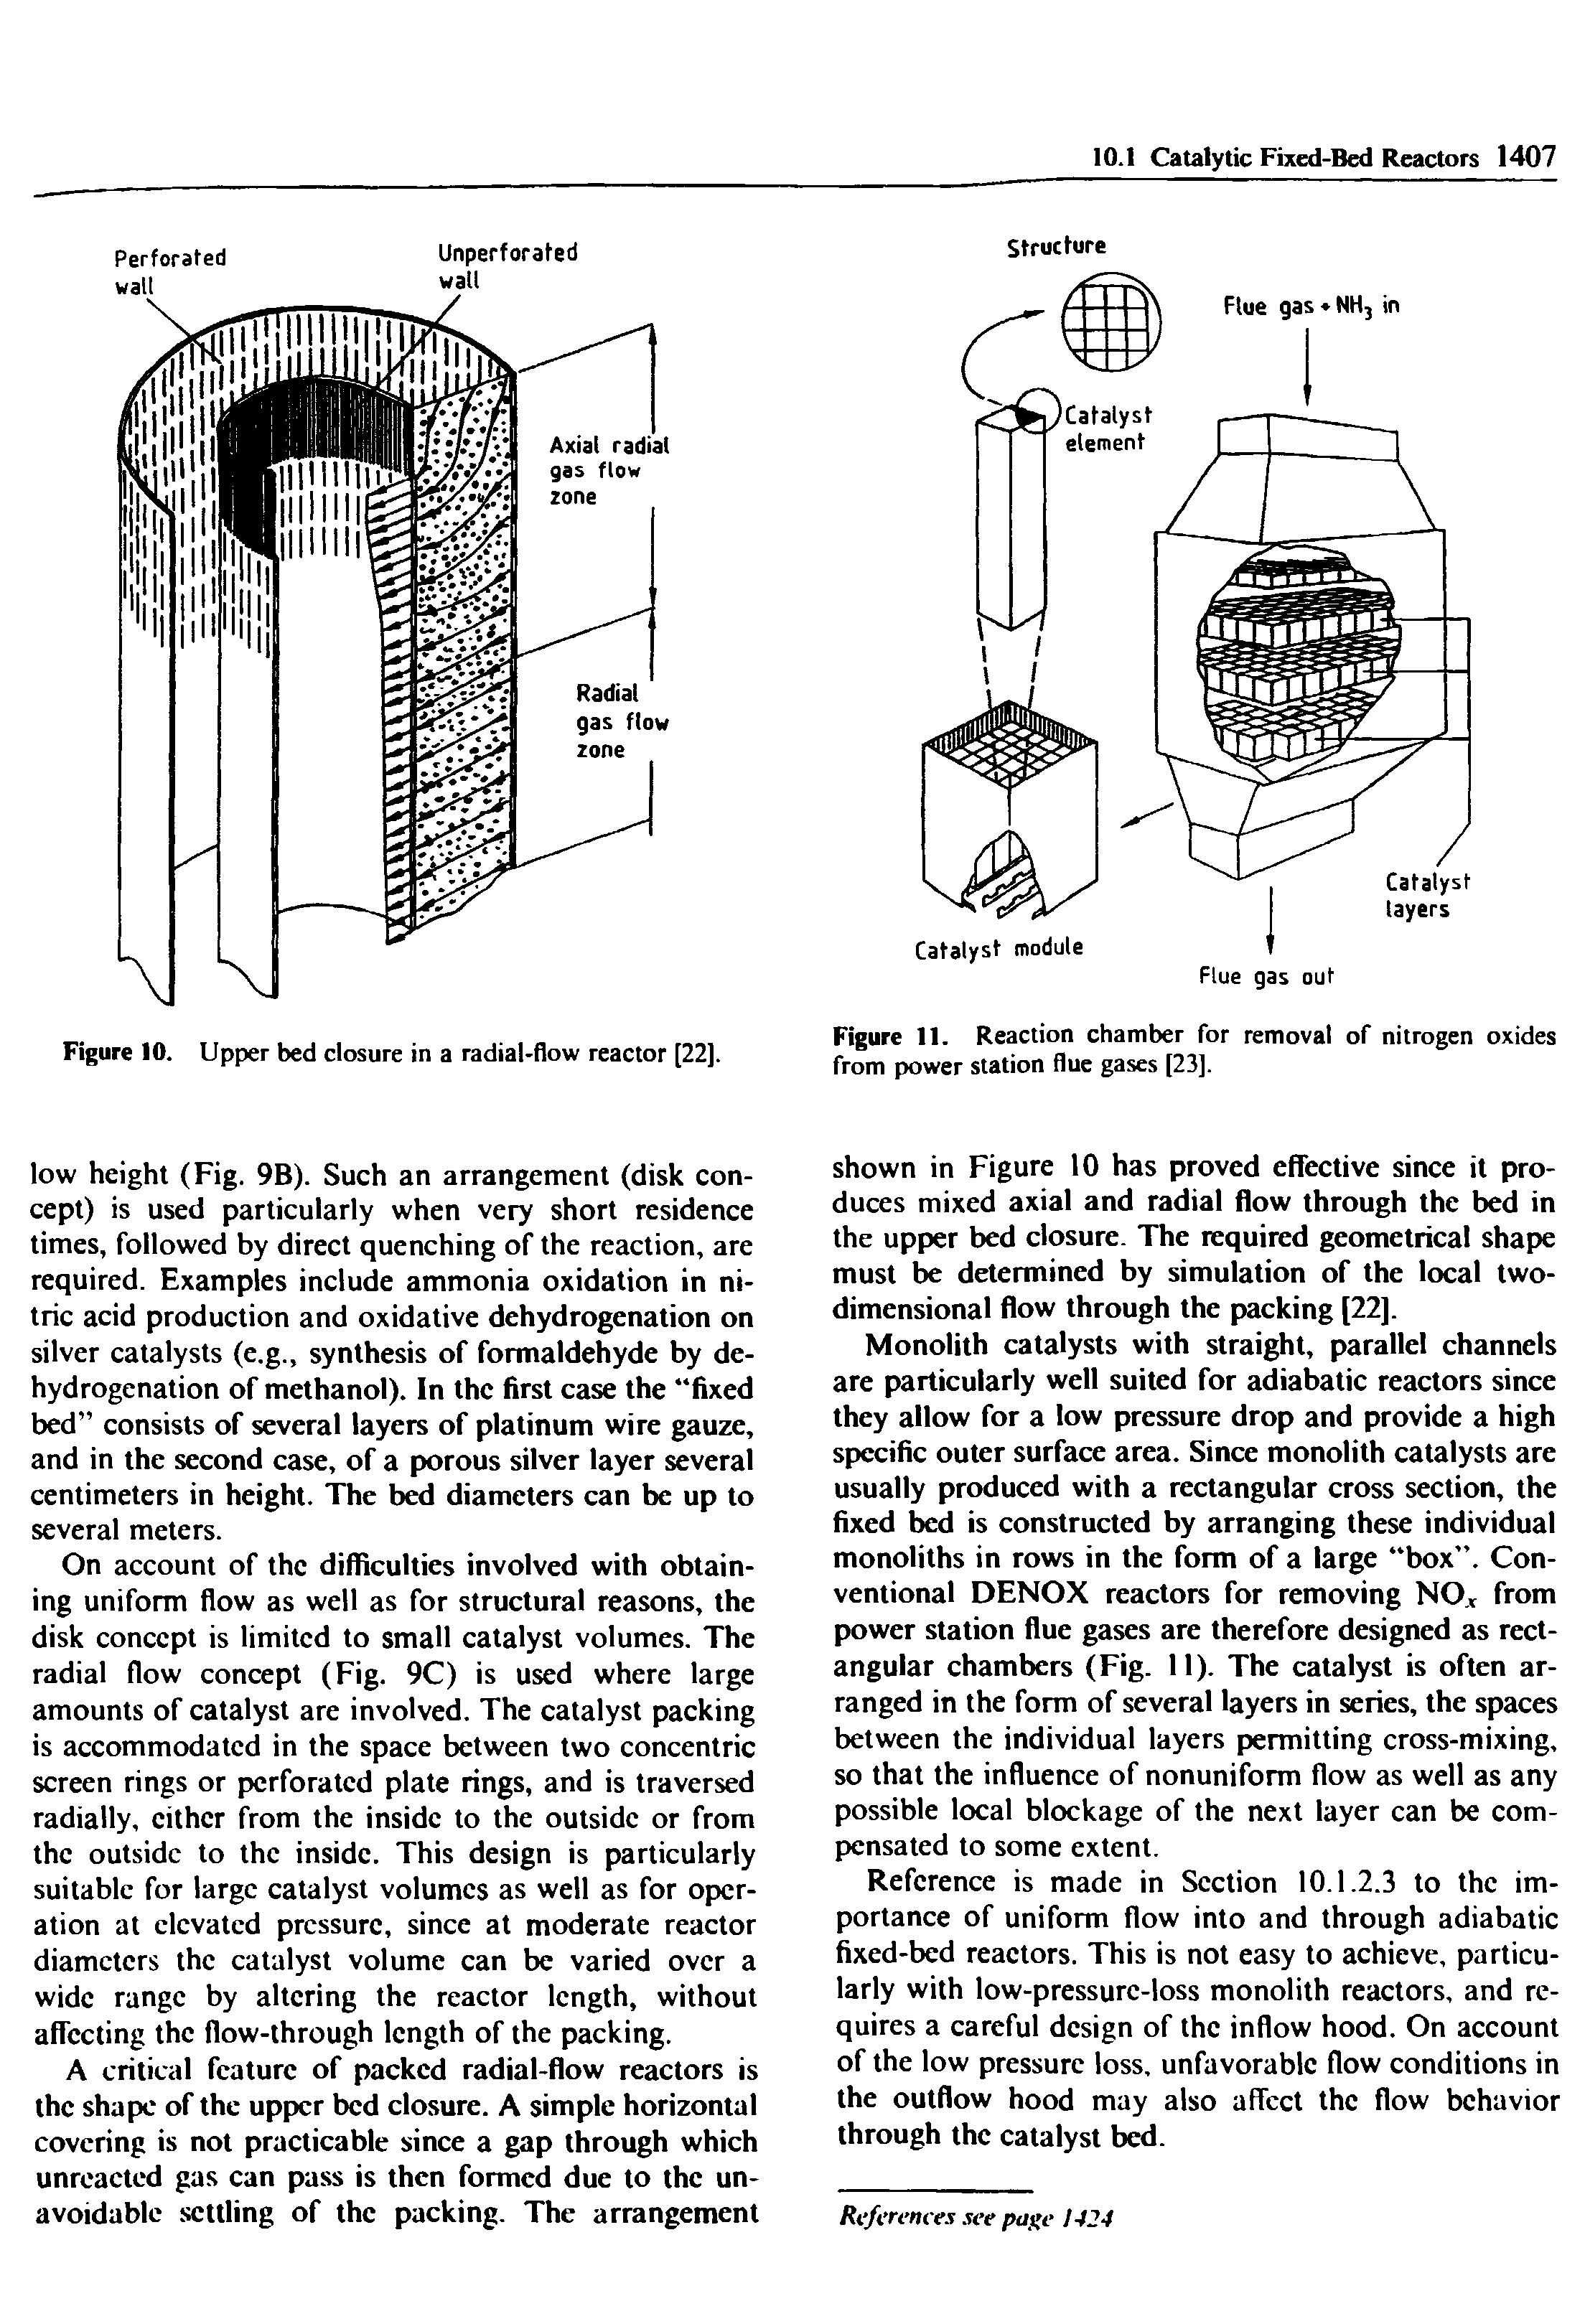 Figure 11. Reaction chamber for removal of nitrogen oxides from power station flue gases [23].